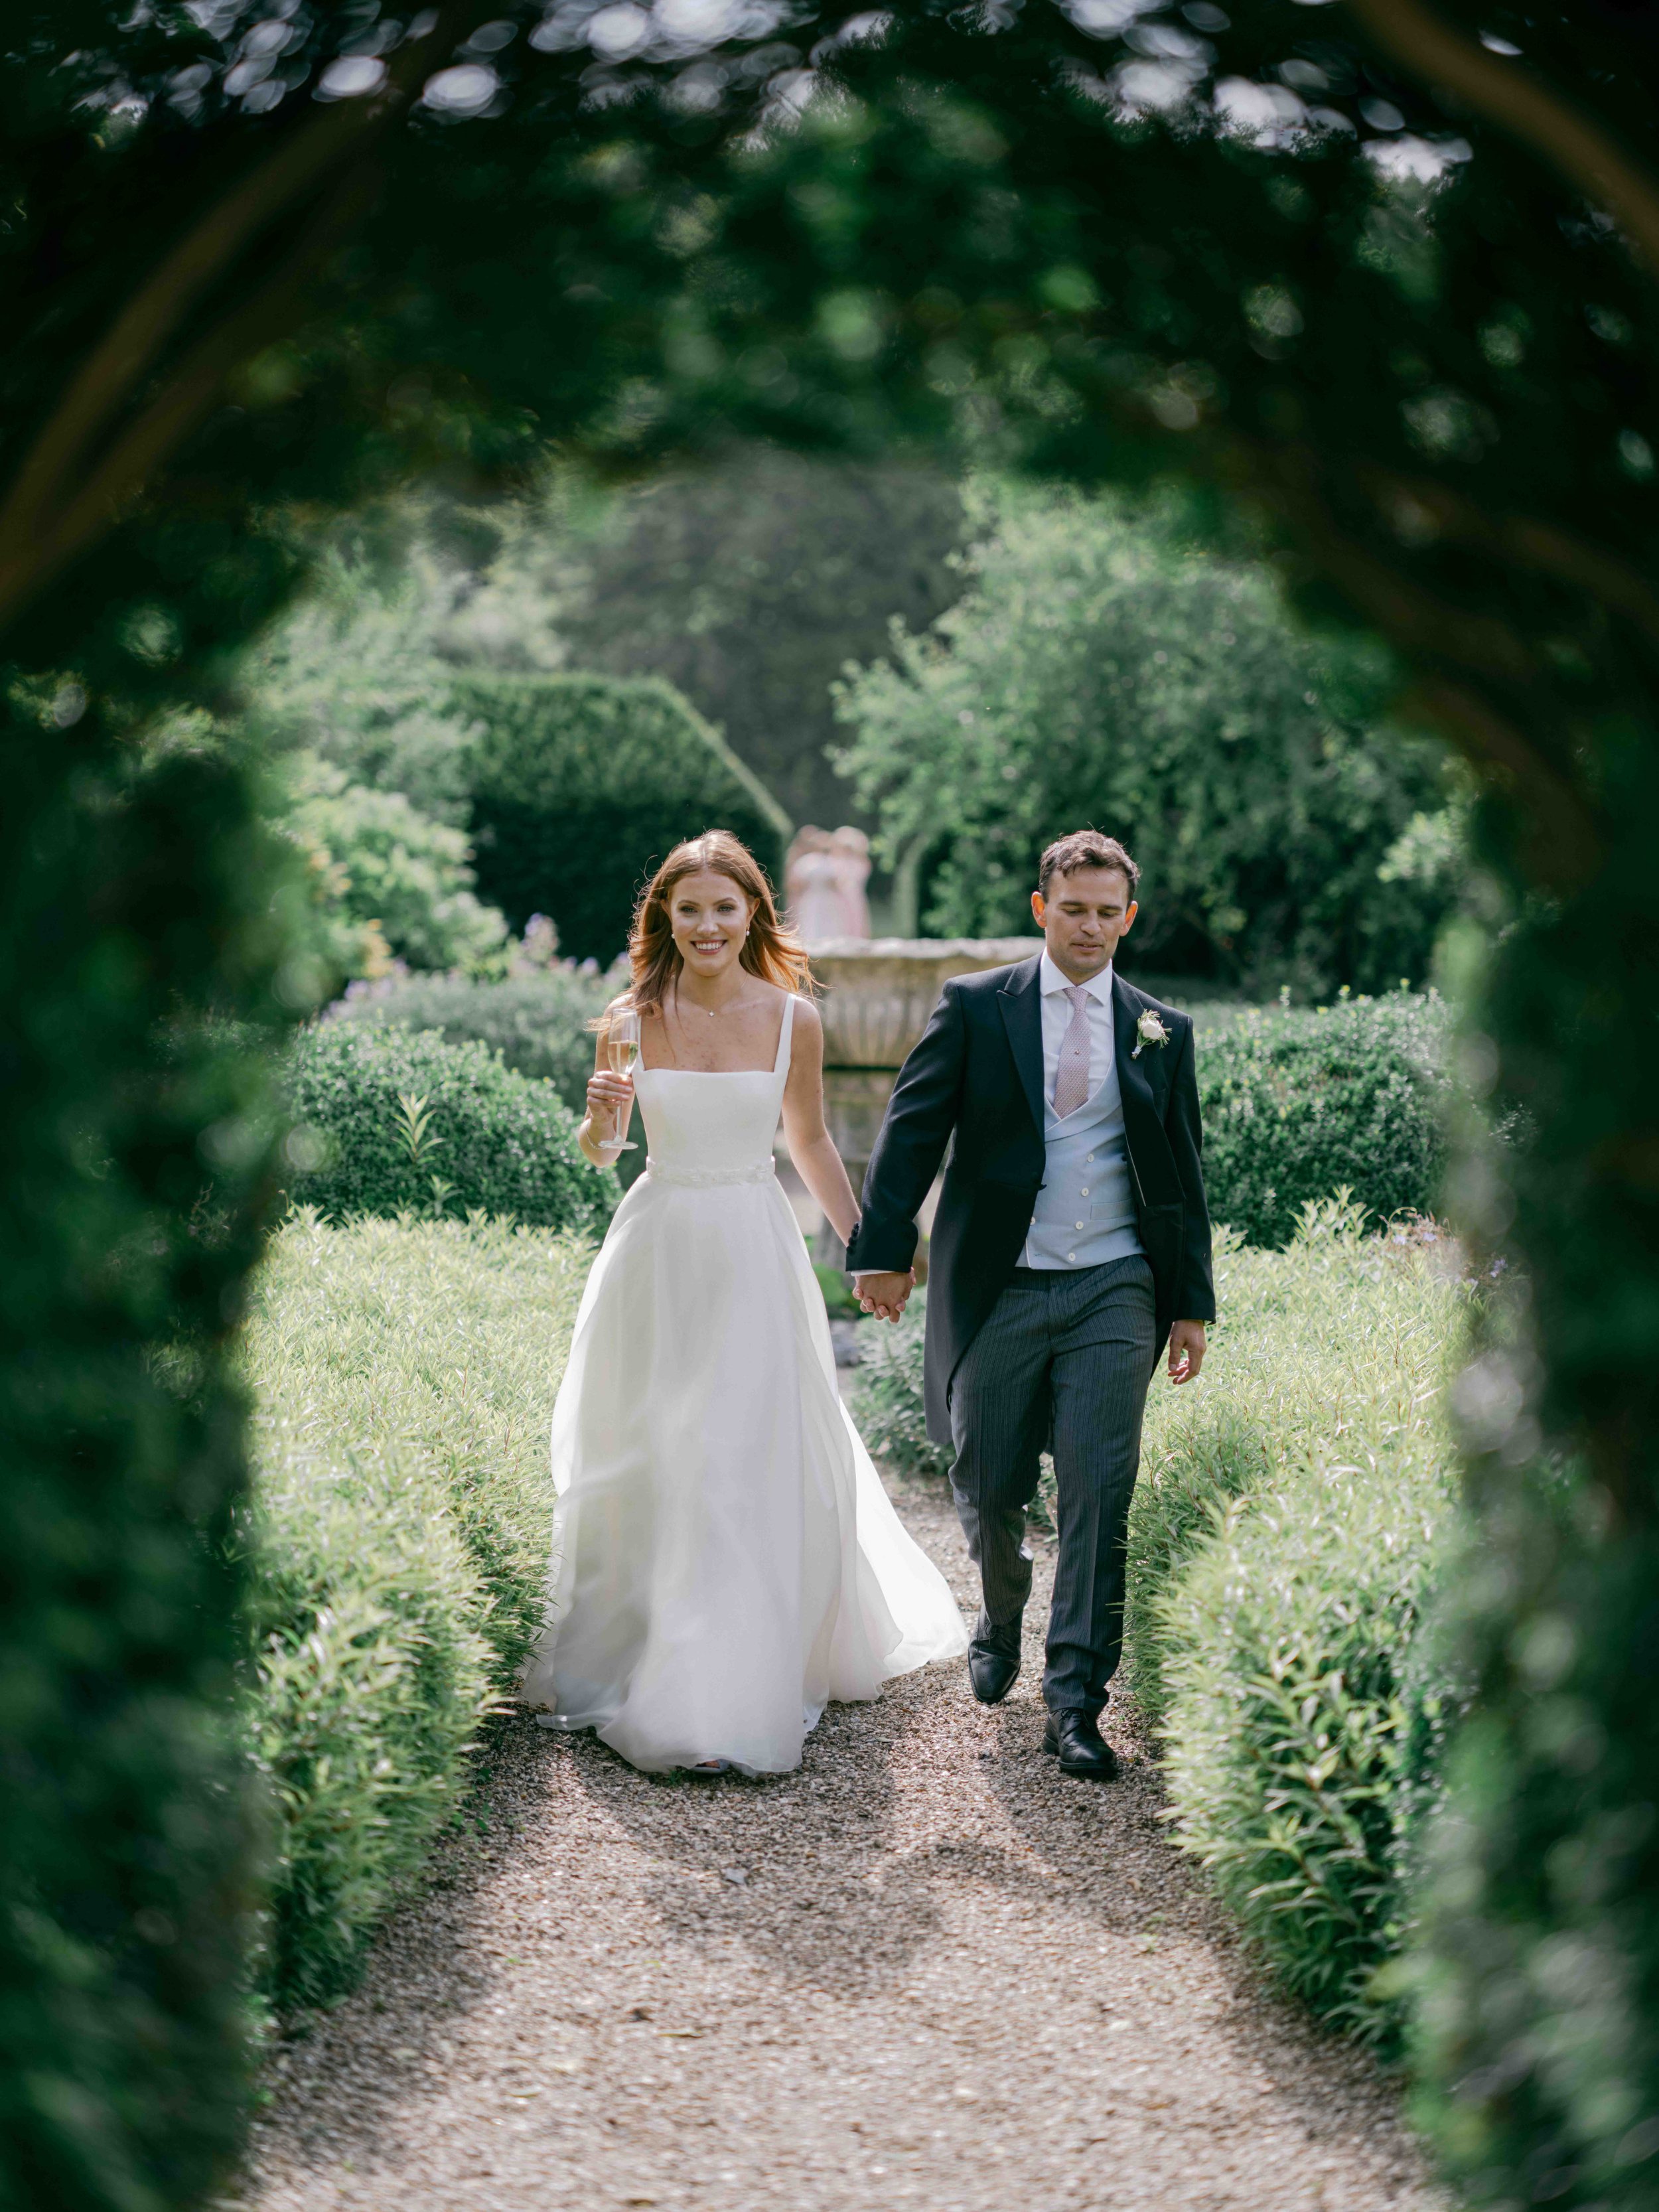  Bride and Groom walking through the gardens at Came House 